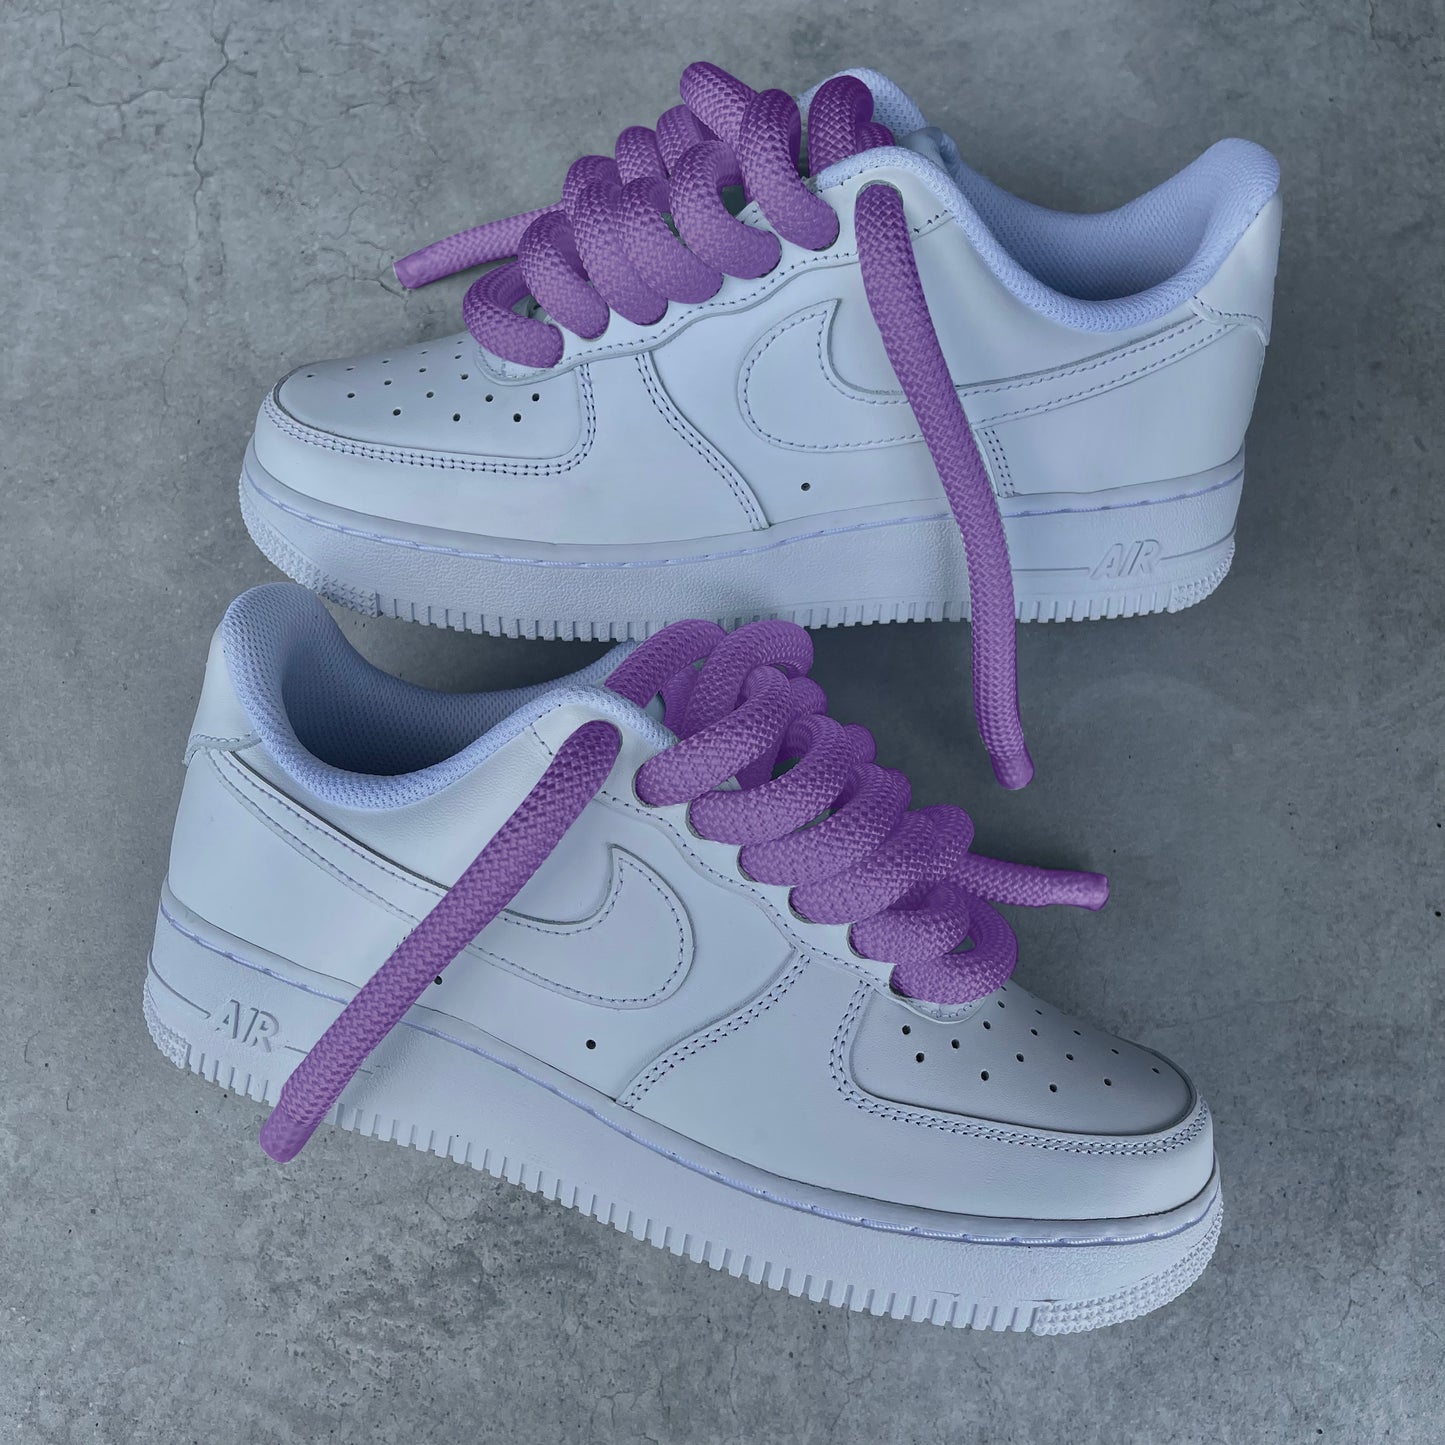 Custom AIR FORCE 1 - Rope laces 2.0 (purple)